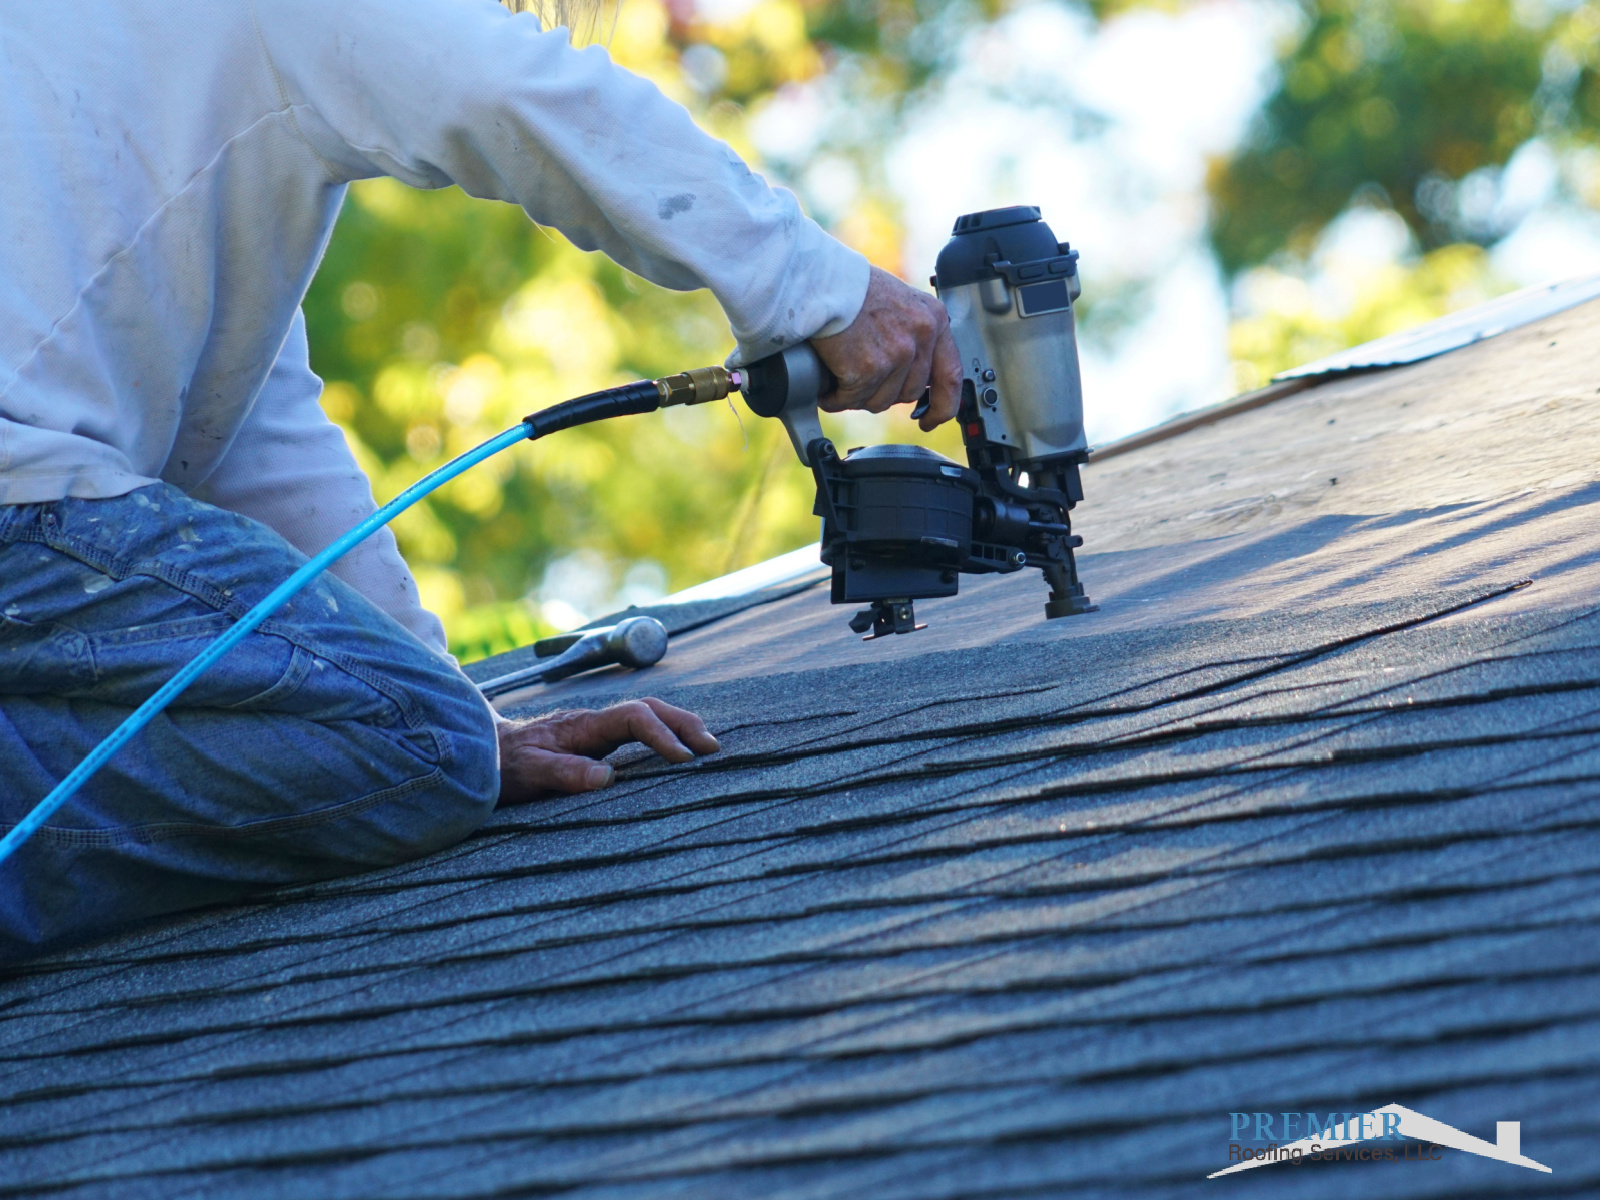 Premier Roofing Services in Redmond: Your Trusted Partner for Roofing Repairs and Replacement